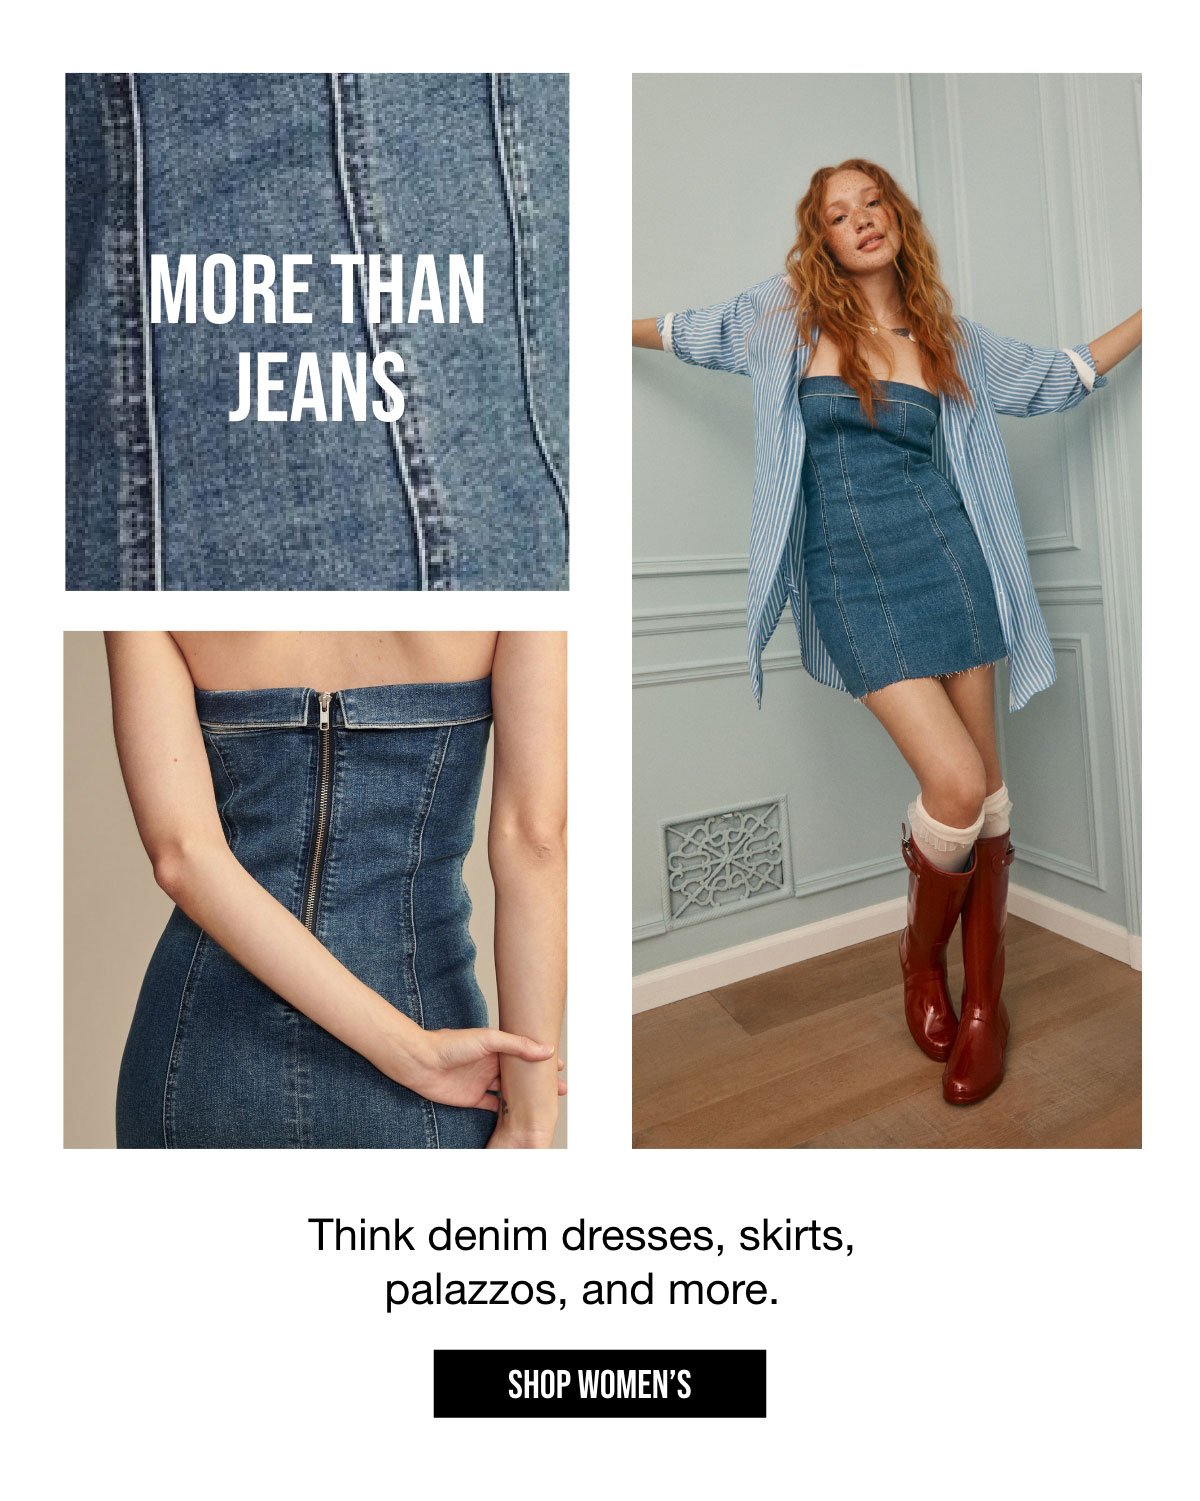 MORE THAN JEANS | Think denim dresses, skirts, palazzos, and more. | SHOP WOMEN'S